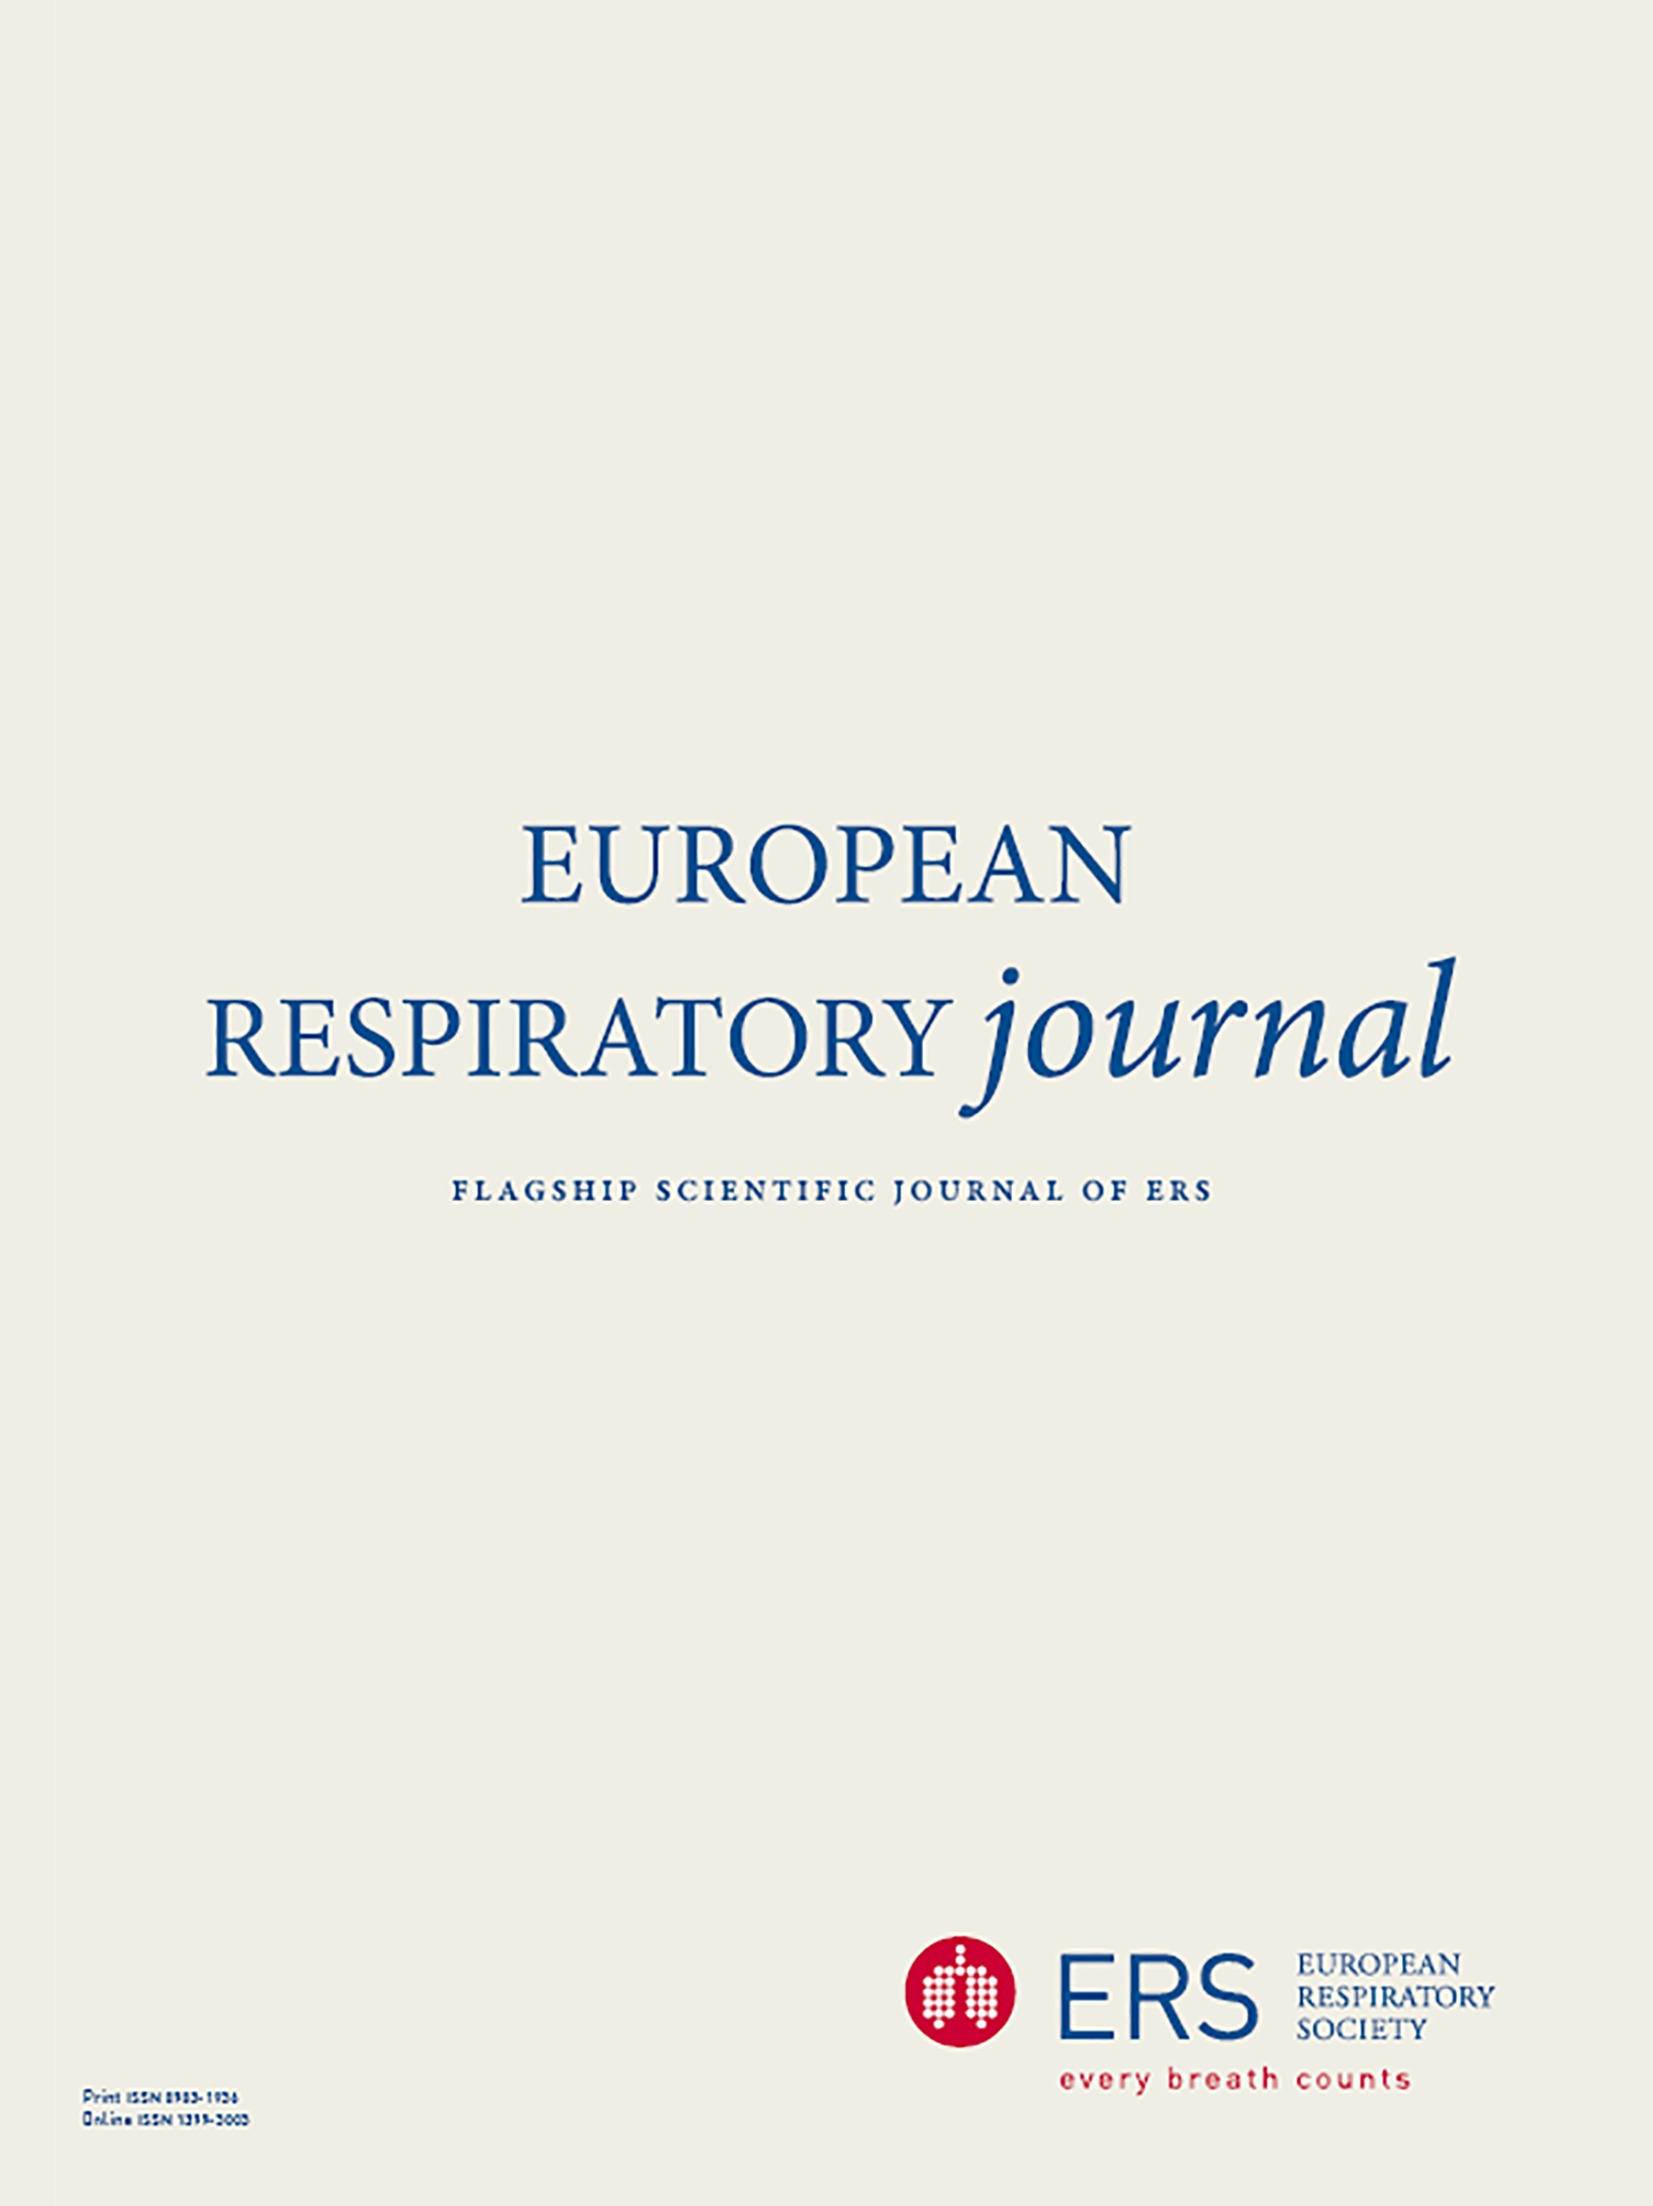 "Crucial role for lung iron level and regulation in the pathogenesis and severity of asthma." M.K. Ali, R.Y. Kim, A.C. Brown et al. Eur Respir J 2020; 55: 1901340.